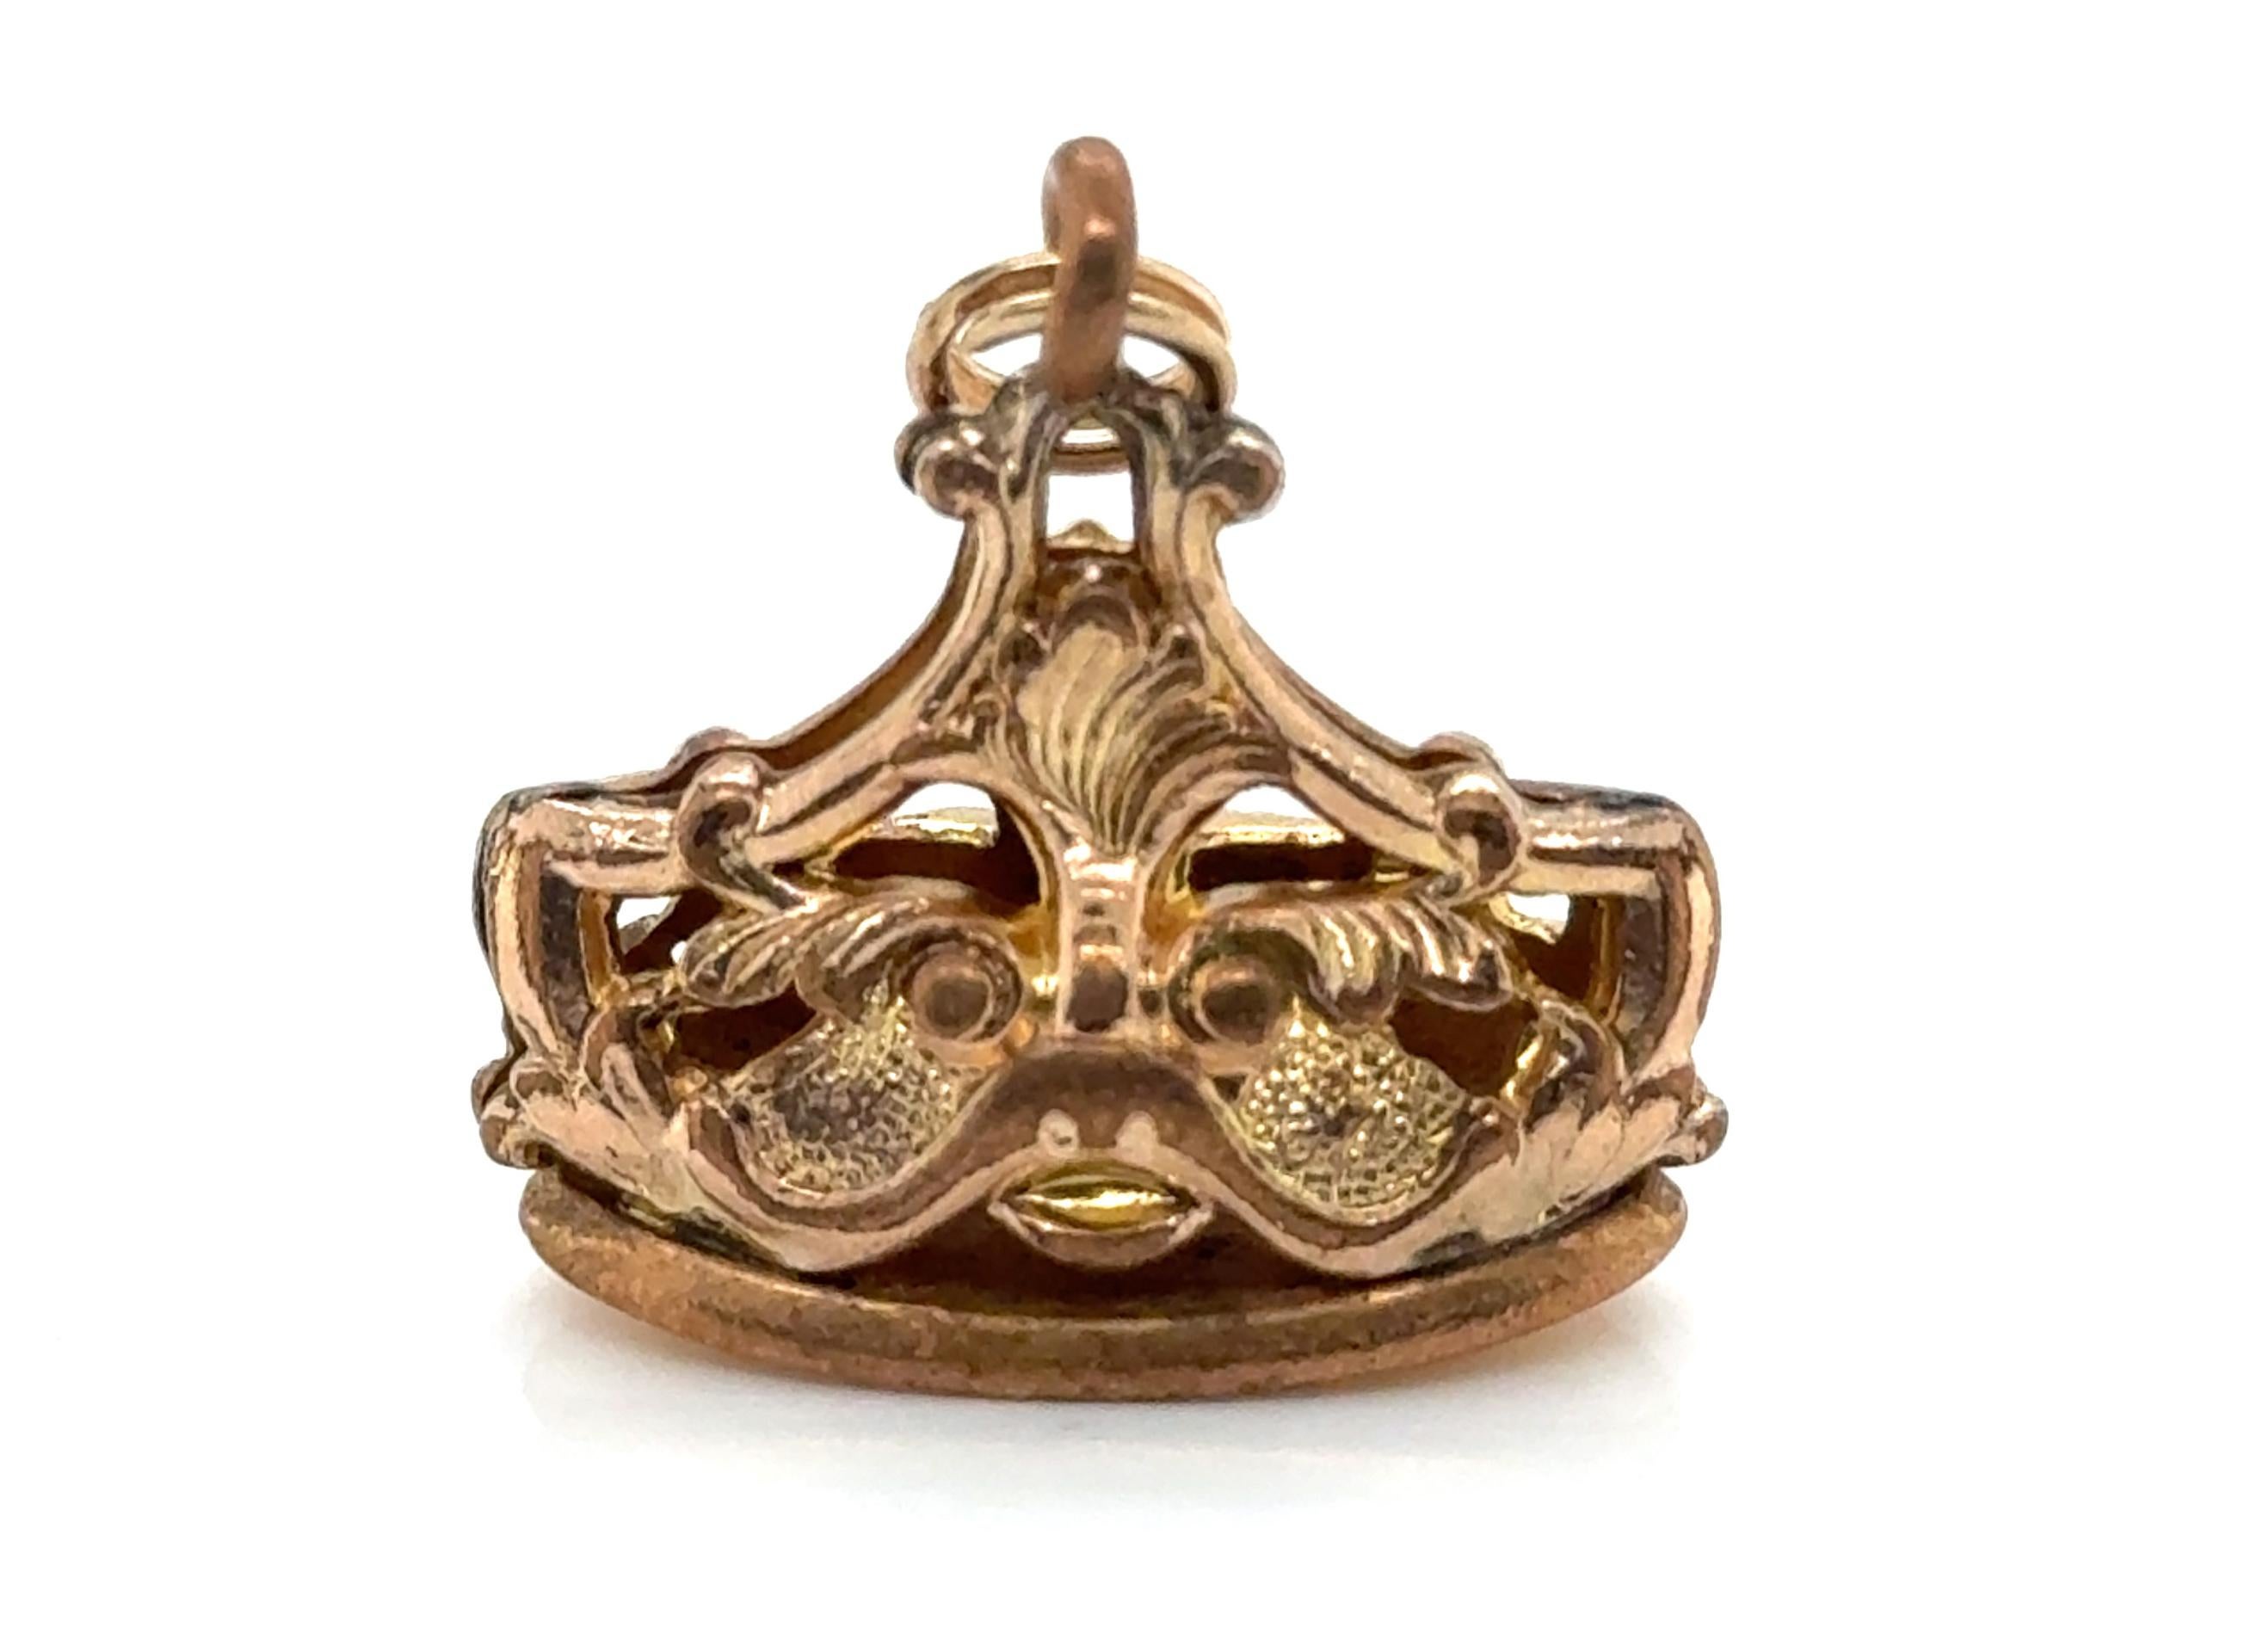 Genuine Original Antique from 1890's Victorian Pocket Watch Fob Charm Gold Filled


Lovely Detailed Engraved Design

All Original and Handmade

Incredible Worksmanship

Gold Filled

Circa 1890's

The Victorian Era in Jewelry Design 

Genuine